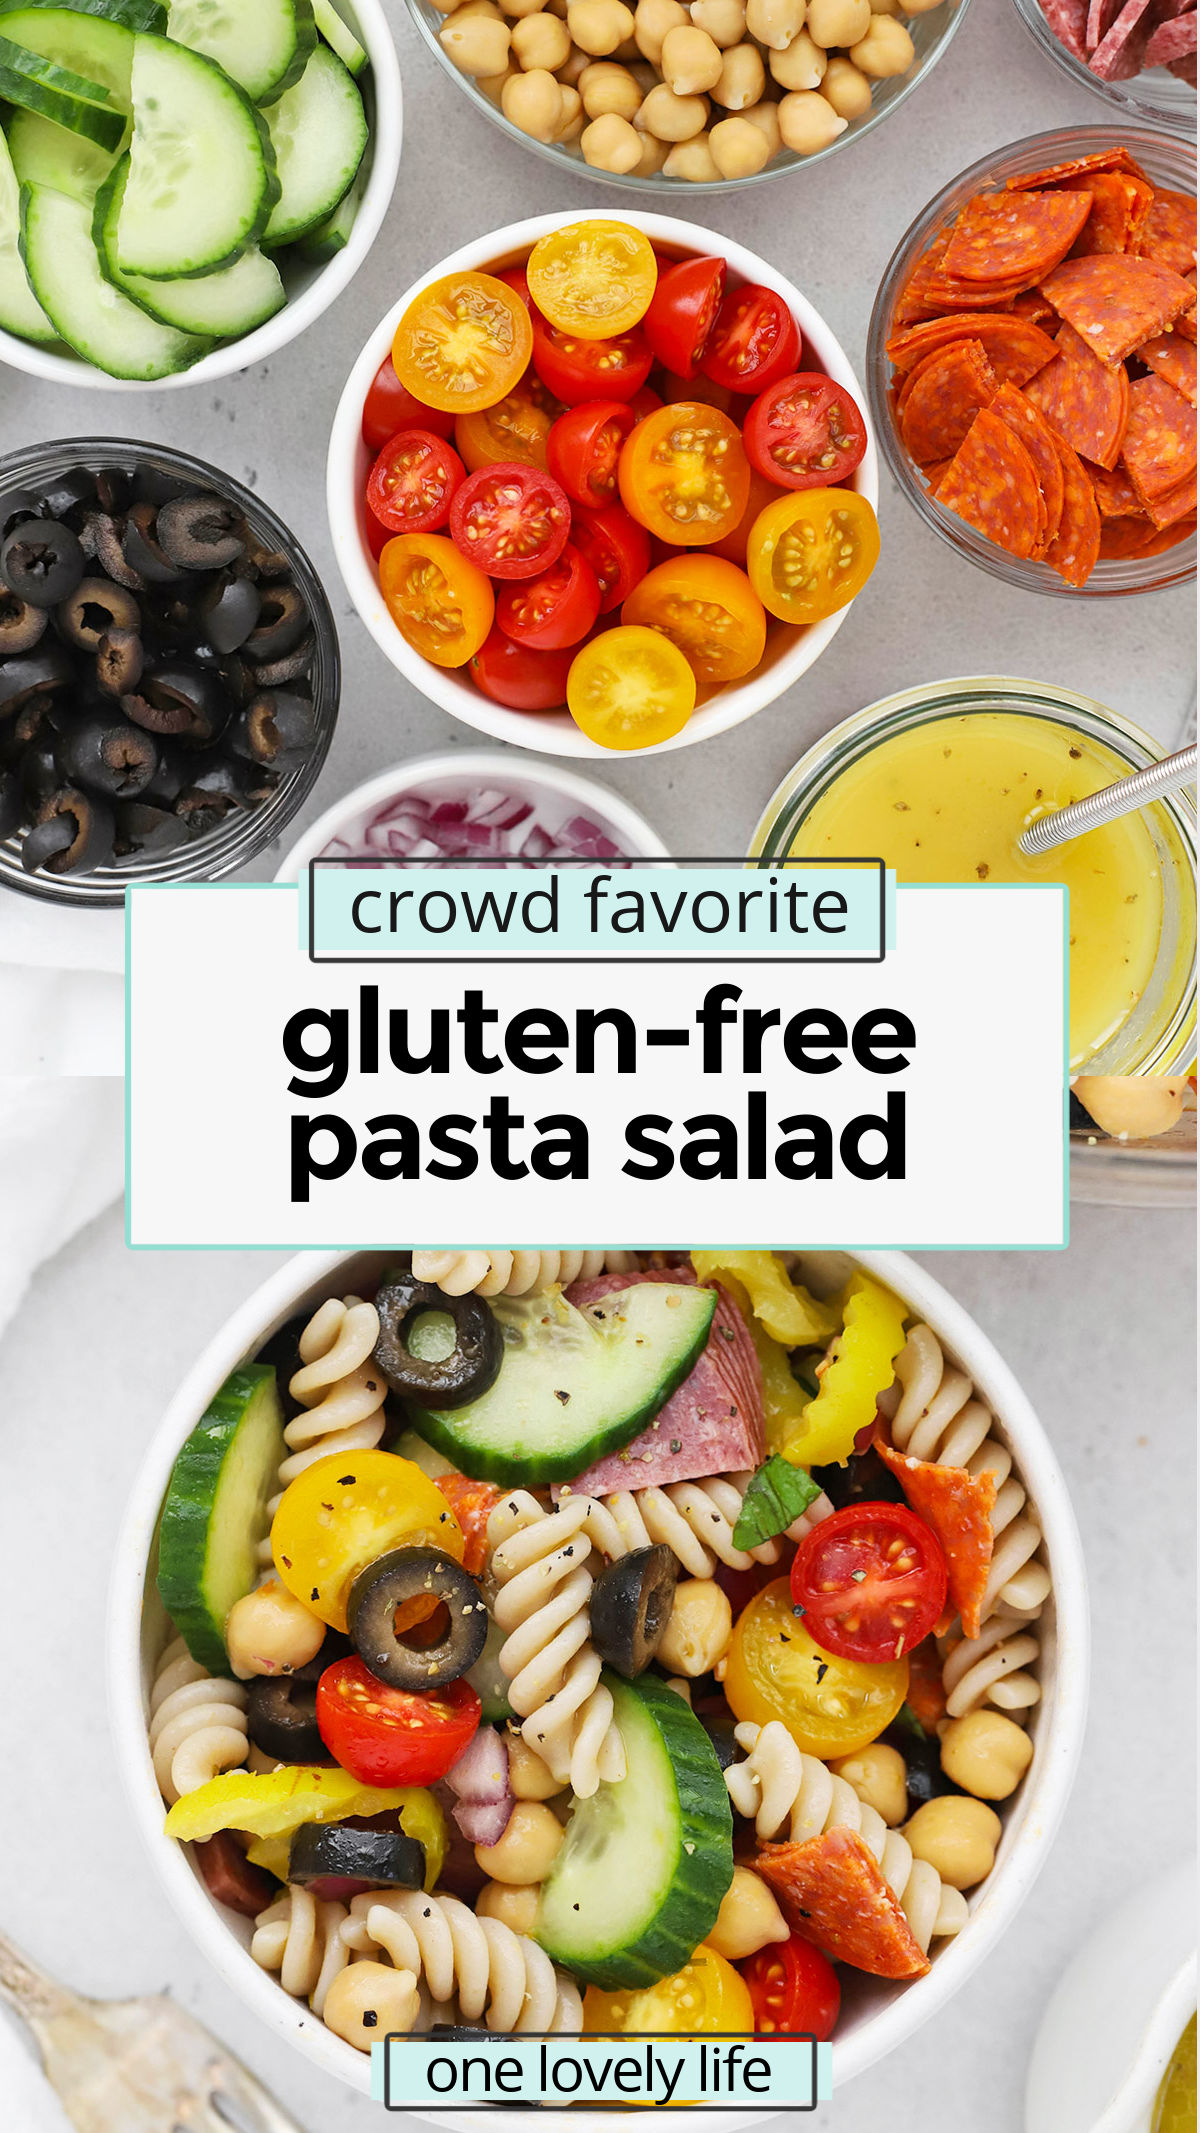 Easy Gluten-Free Pasta Salad - This easy salad is made with colorful veggies, layers of flavor, and a quick homemade dressing you're SURE to love! (Gluten-Free, Dairy-Free) // gluten free salad recipe / gluten free Italian pasta salad / gluten-free antipasto pasta salad / the BEST gluten-free pasta salad recipe / easy summer salads / gluten-free potluck recipe / gluten-free picnic recipe / gluten free salad